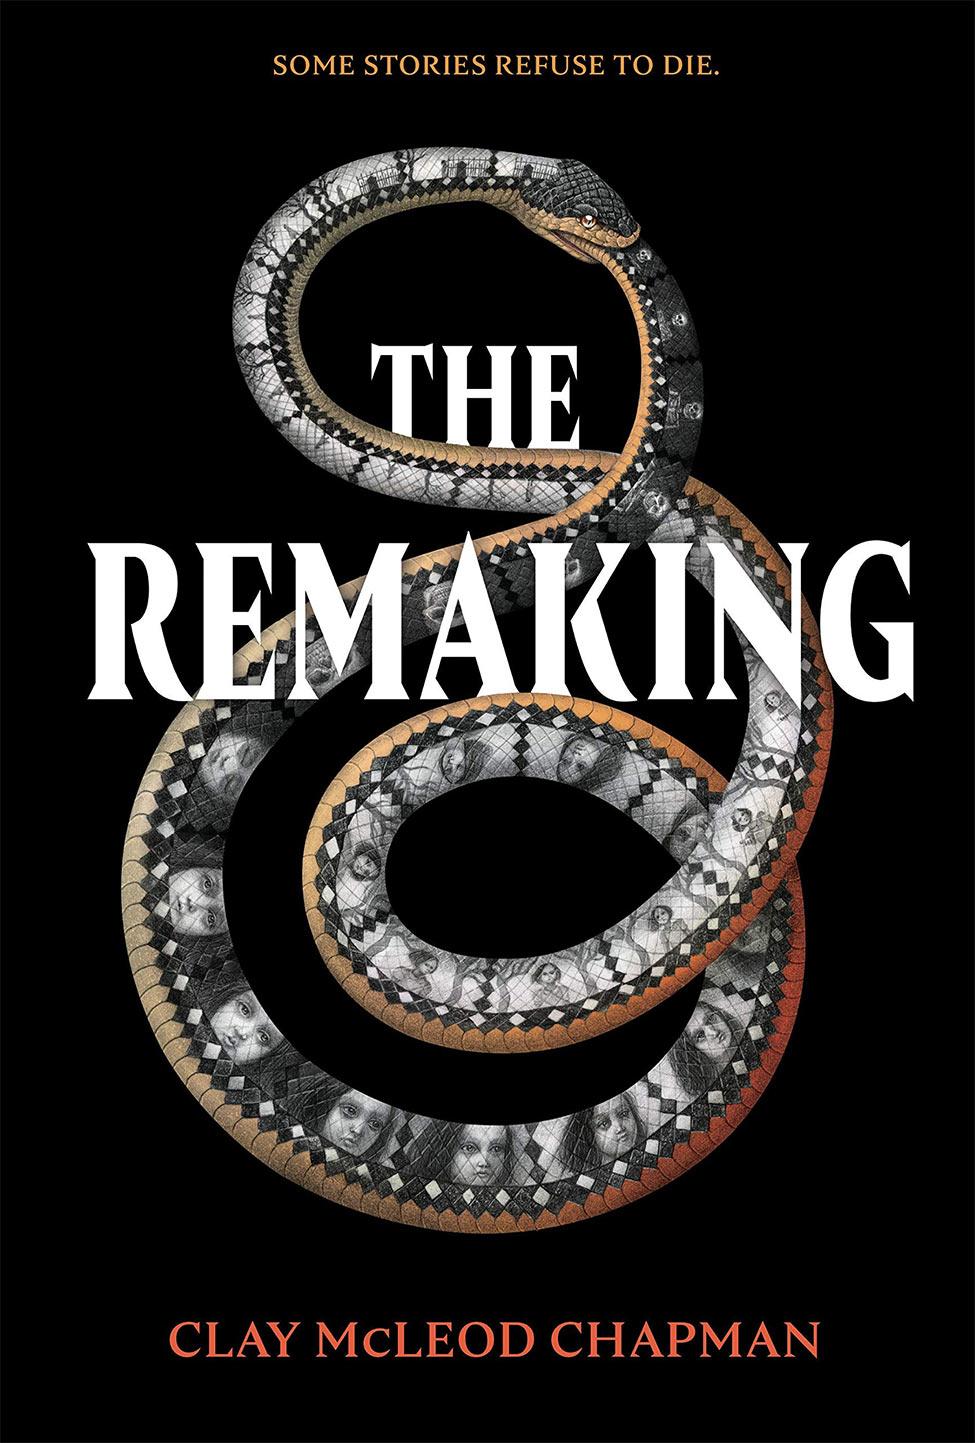 The Remaking by Clay Mcleod Chapman